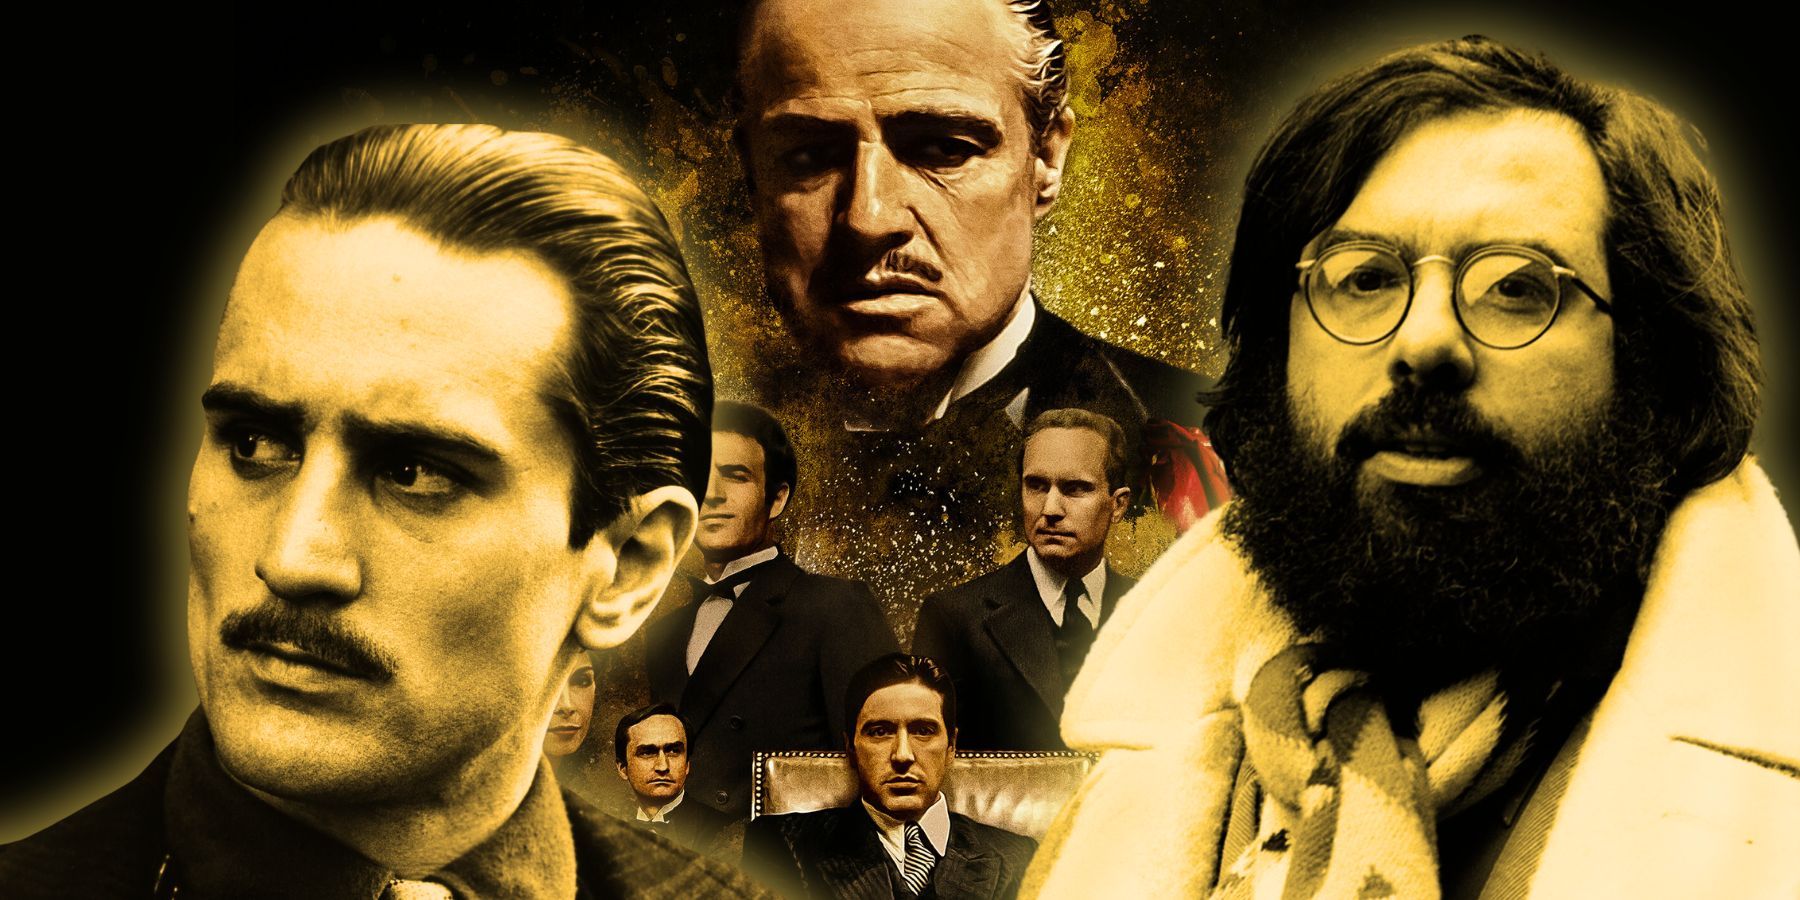 robert de niro with francis ford coppola and the godfather 50 poster